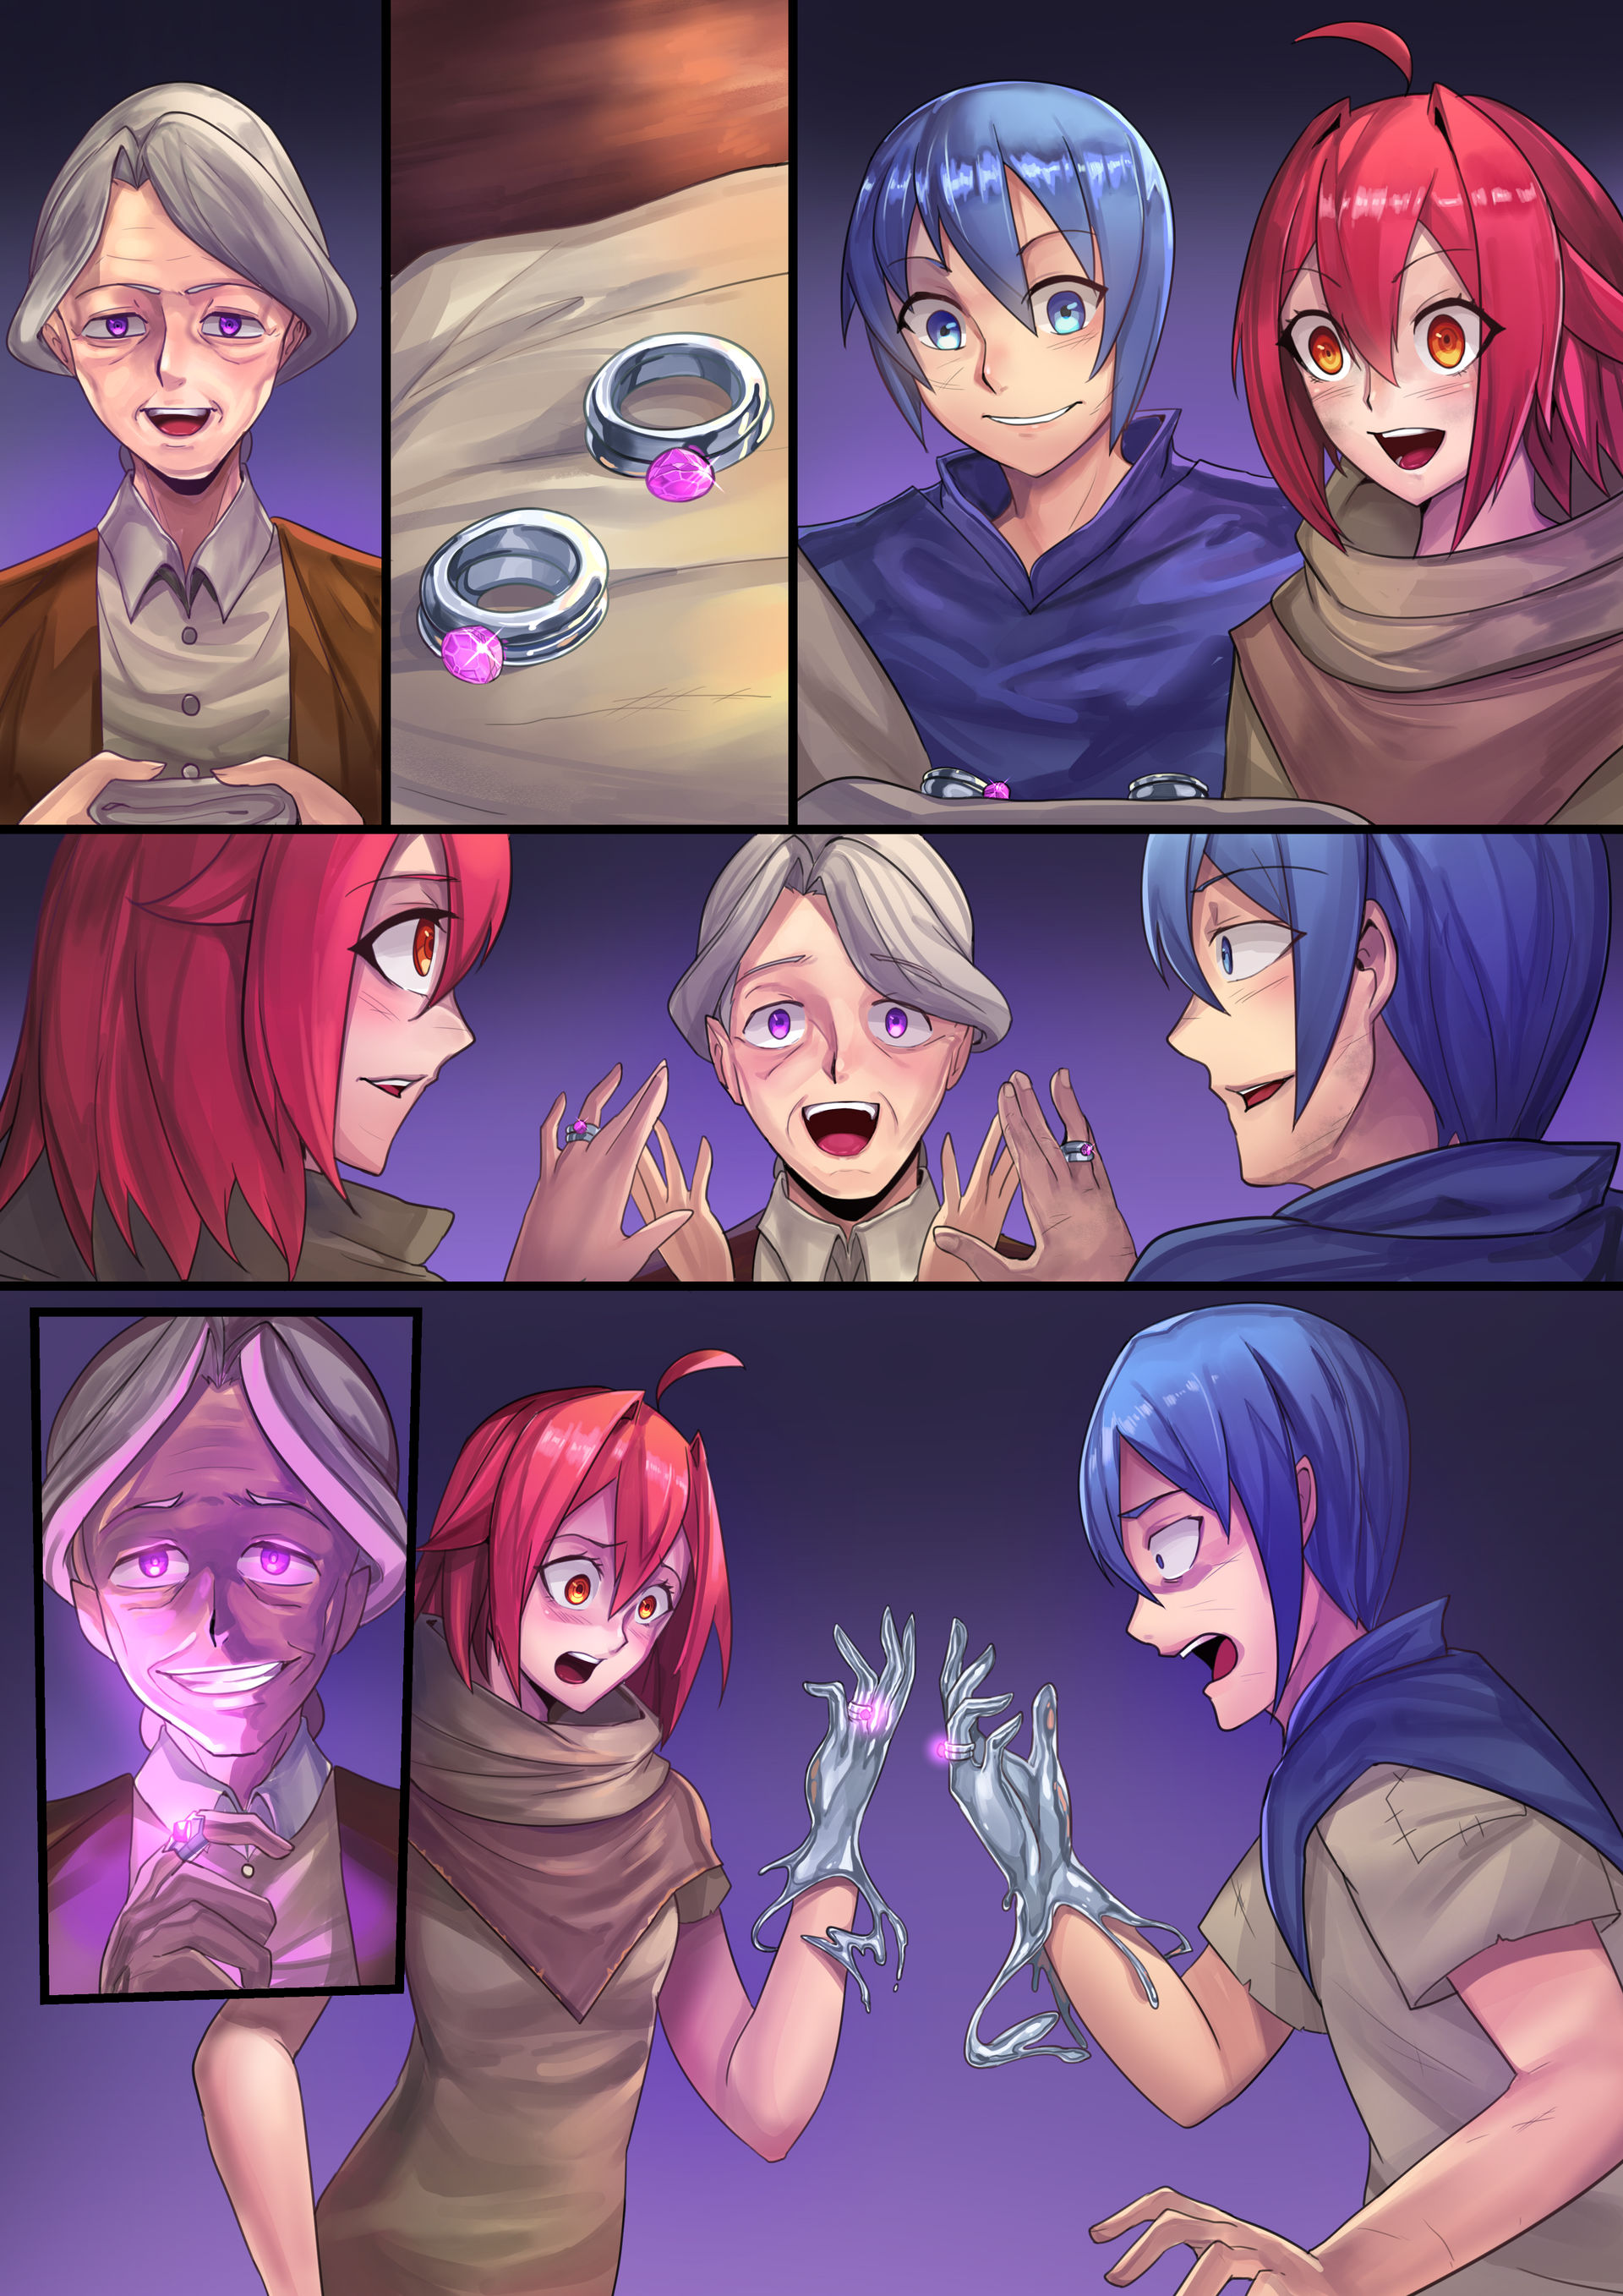 Ninja and the dark cult 2 page 5 by ibenz009 on DeviantArt